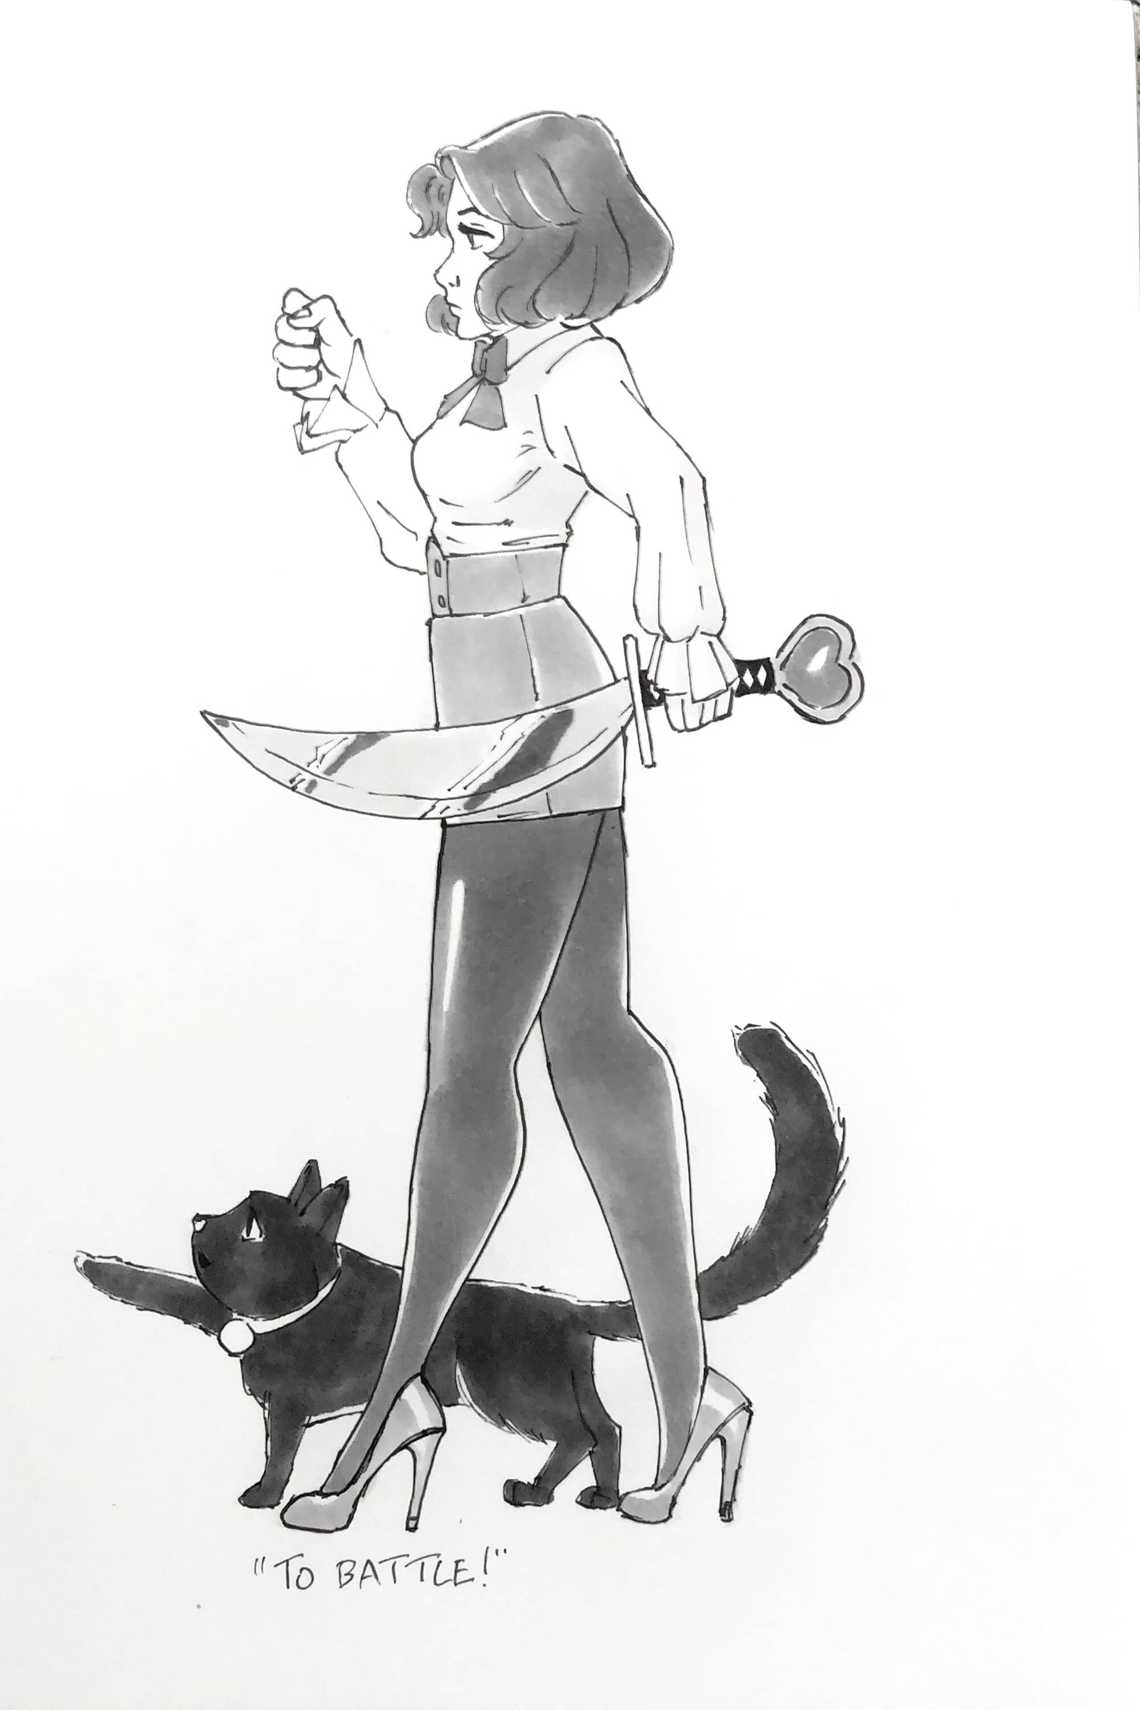 Take This it's Dangerous! Magical Girl Kamiko with Cat and Sword